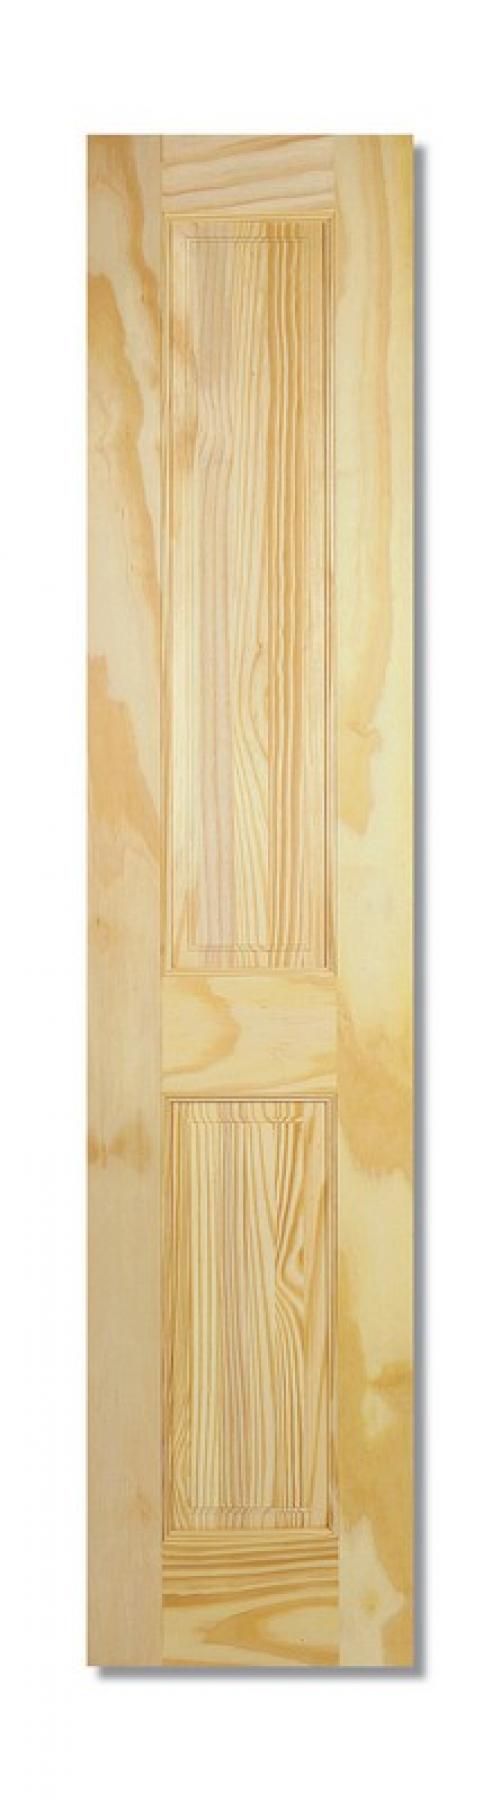 Image for 78X27 4 PANEL CLEAR PINE